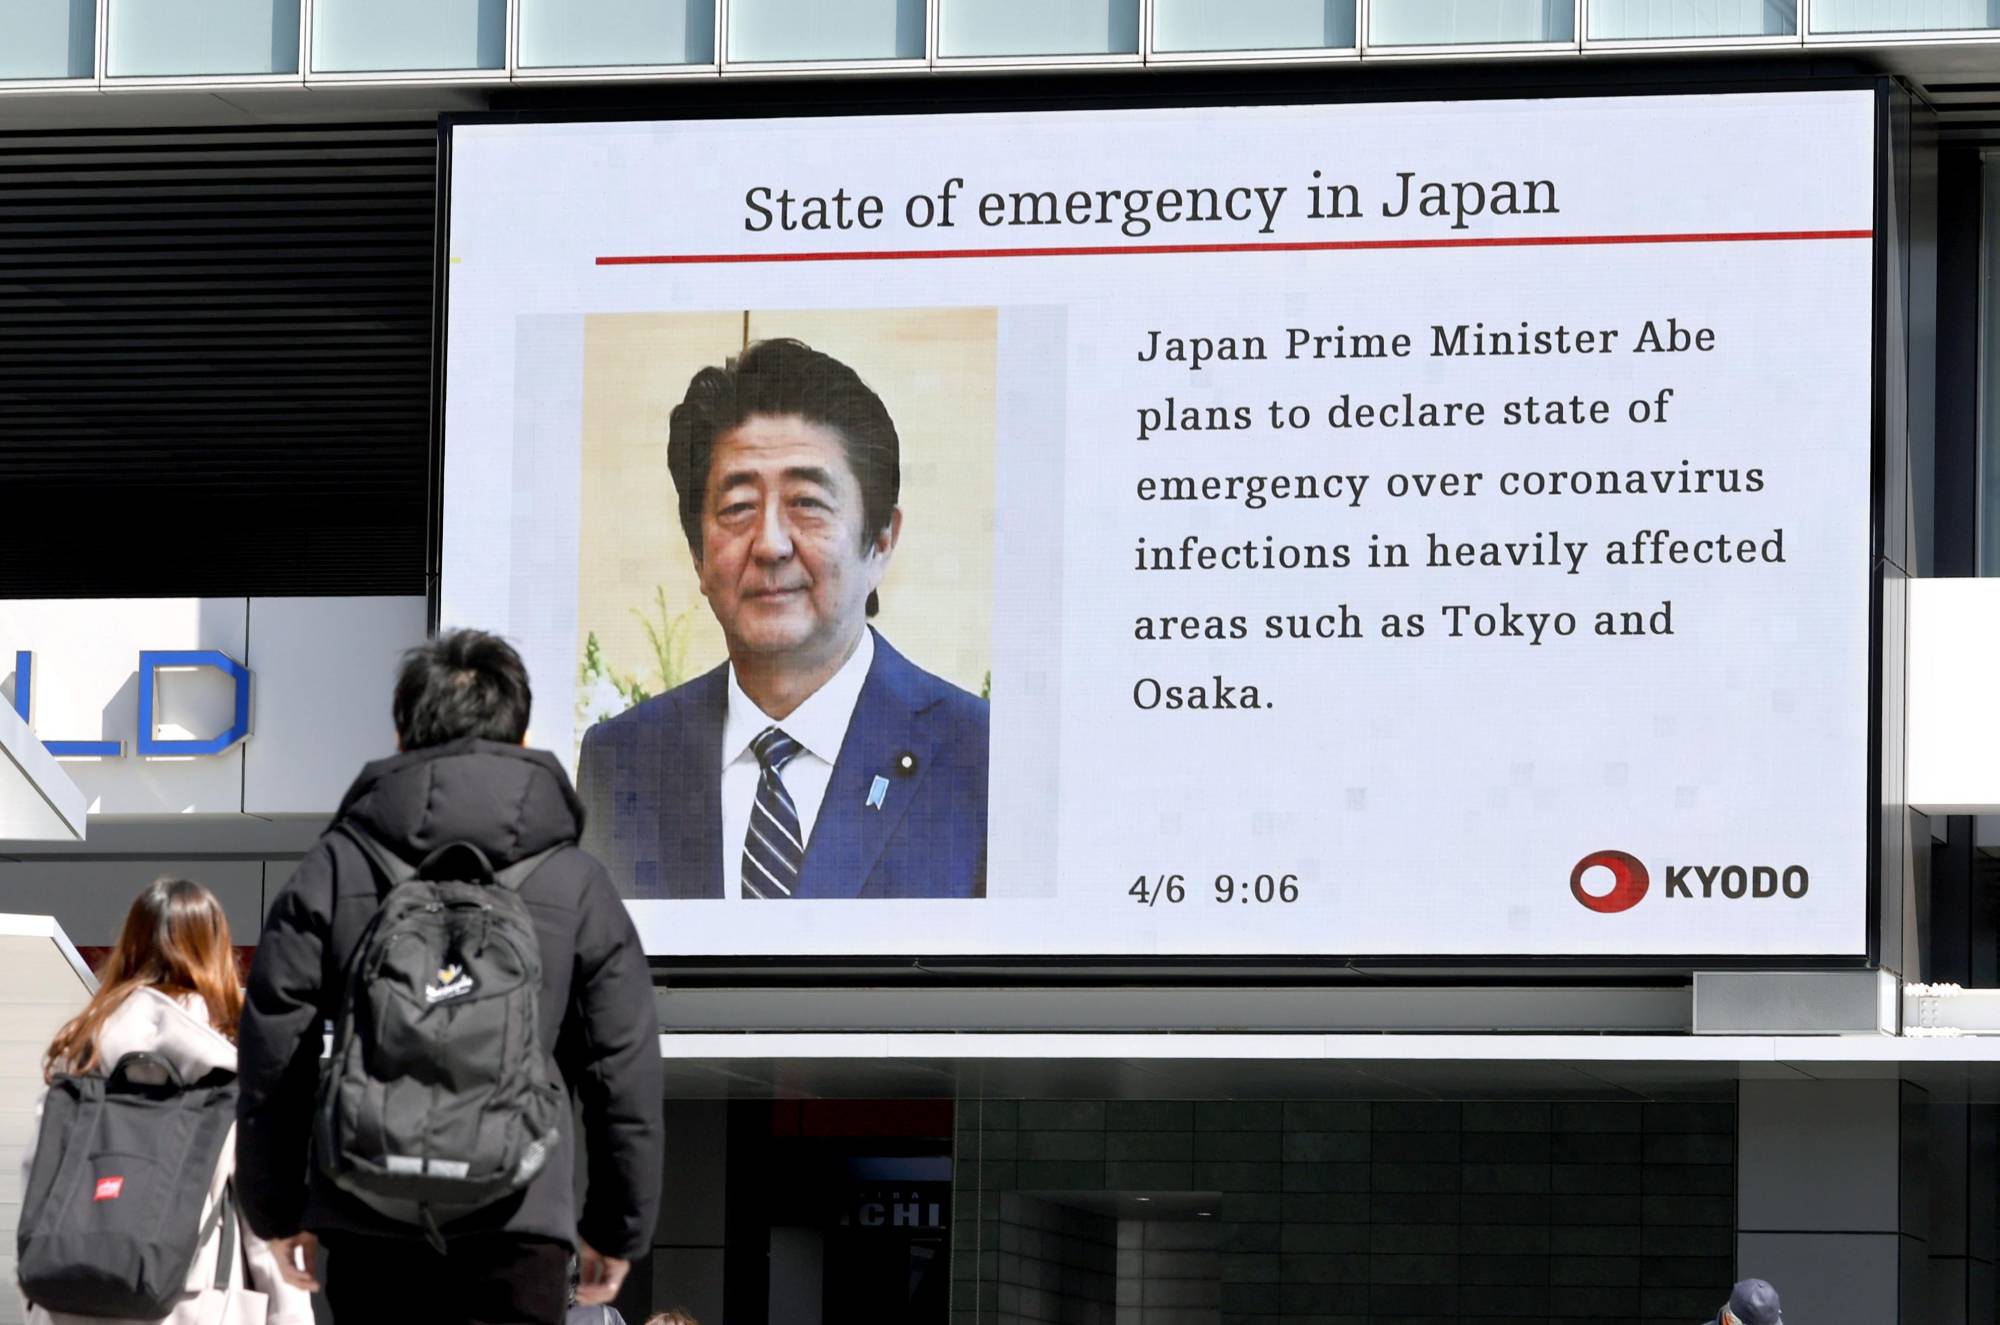 People walk by a big screen in the Akihabara district of Tokyo on Monday broadcasting news that Prime Minister Shinzo Abe is set to declare a state of emergency over the growing spread of COVID-19 in Japan. | KYODO